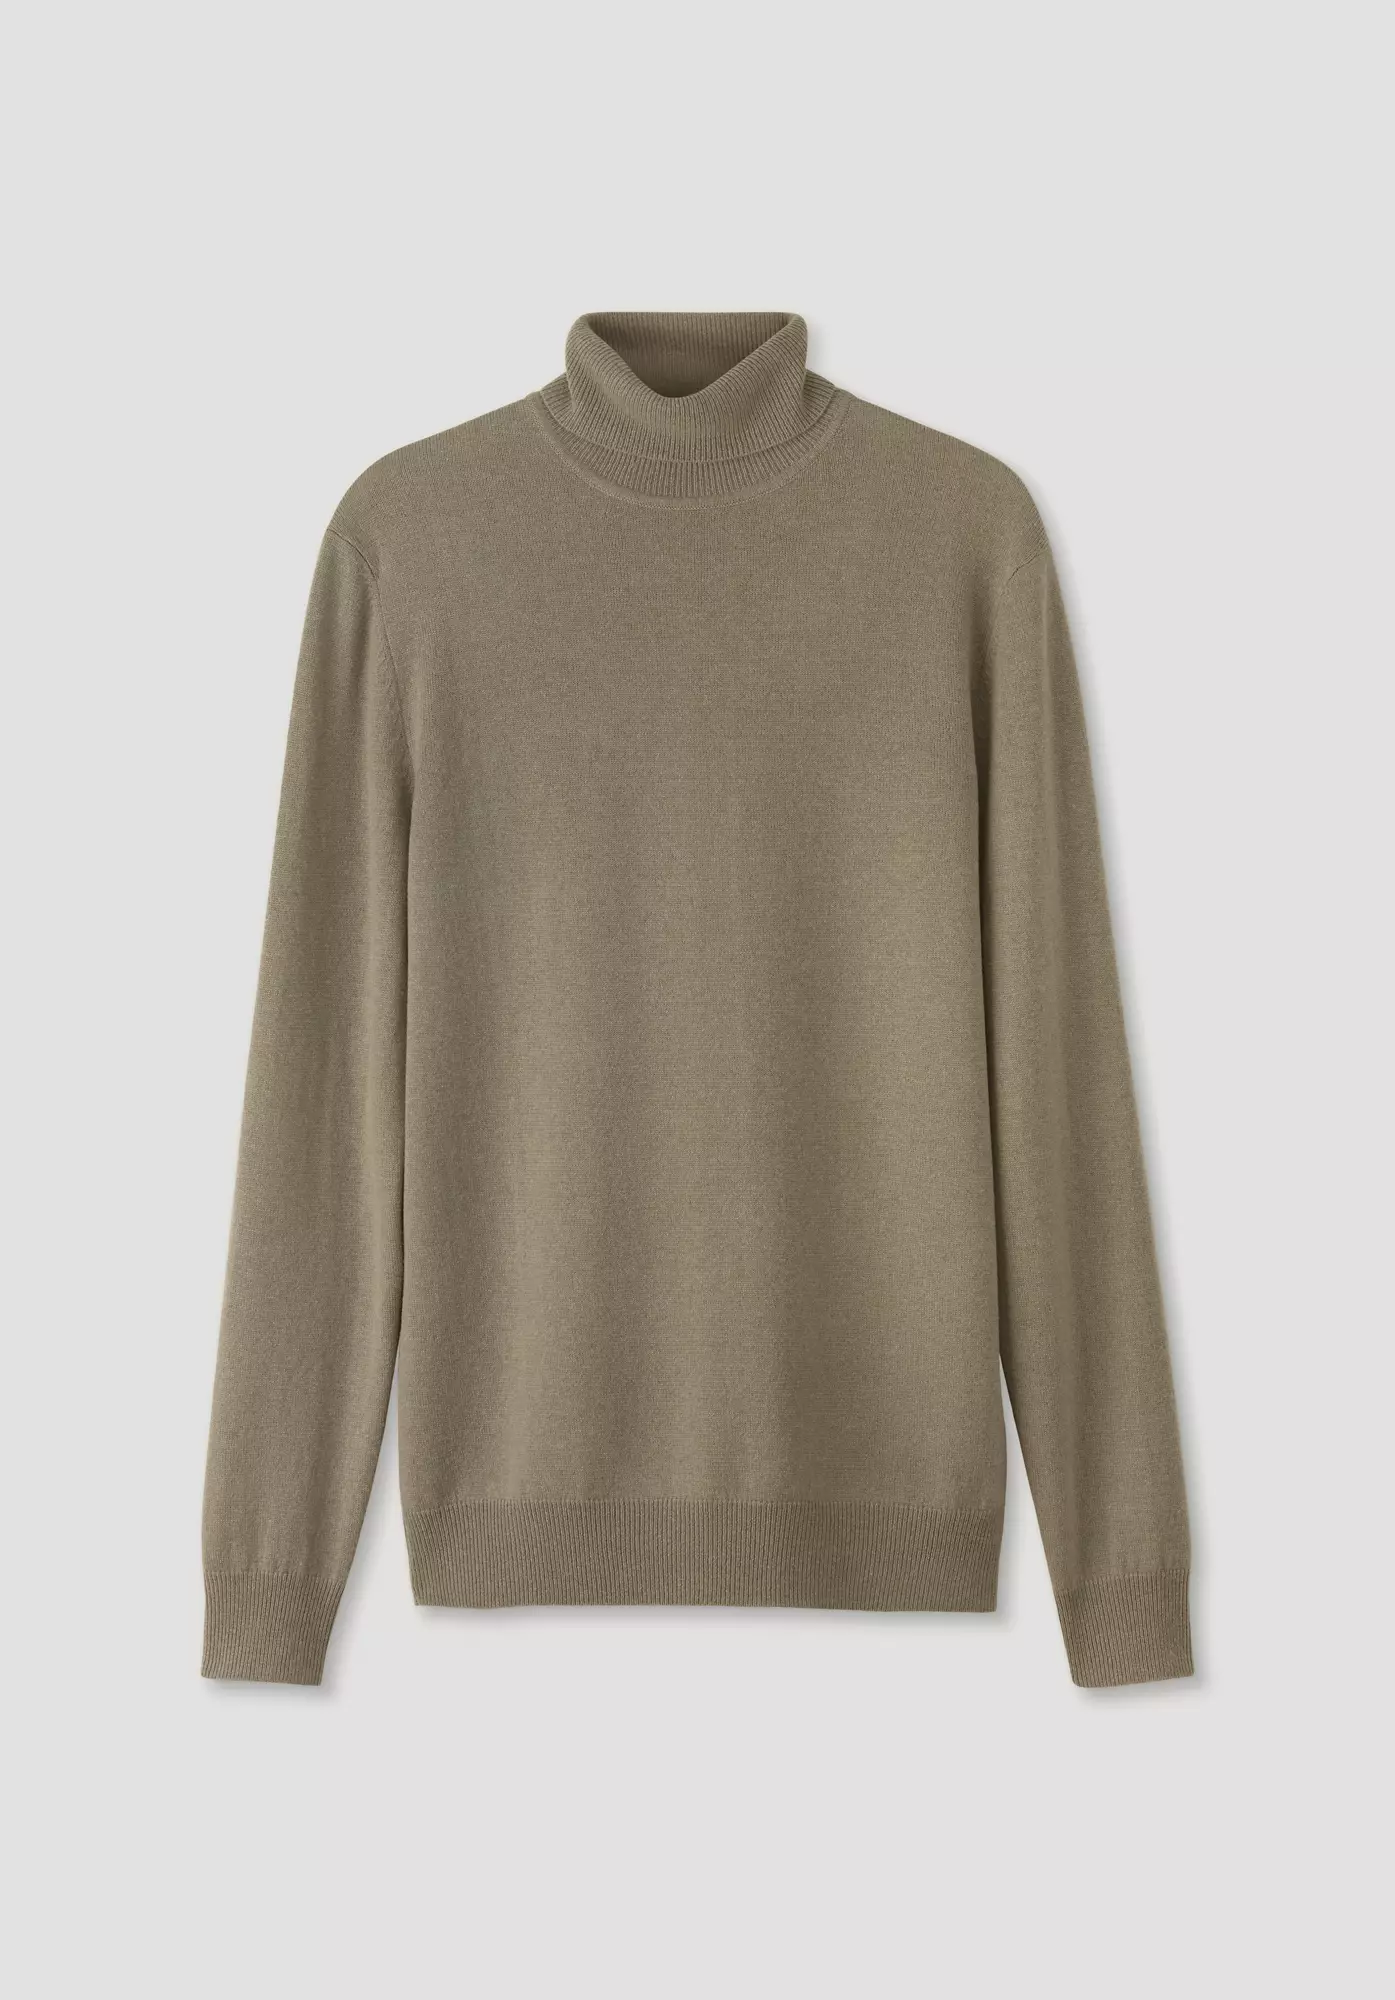 Regular turtleneck sweater made of virgin wool with cashmere - 4